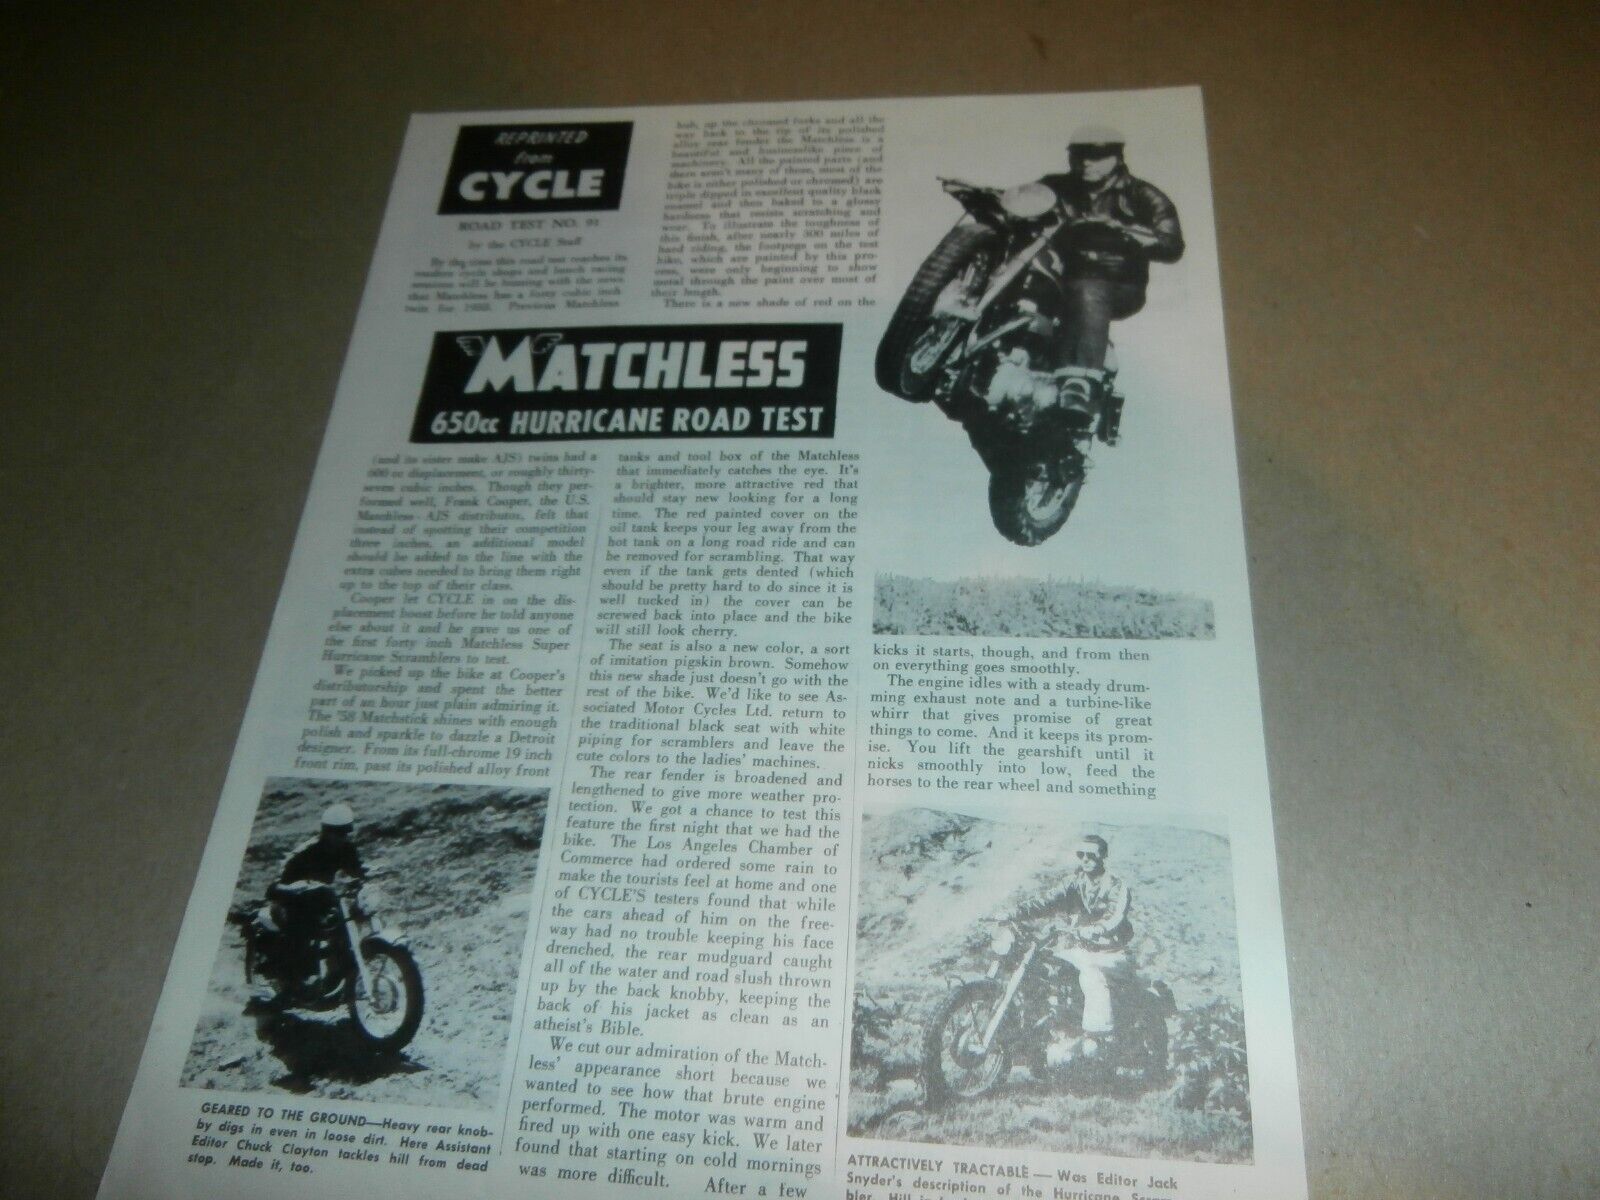 1958 Matchless 650cc Hurricane Motorcycle Road Test Paper from Cycle